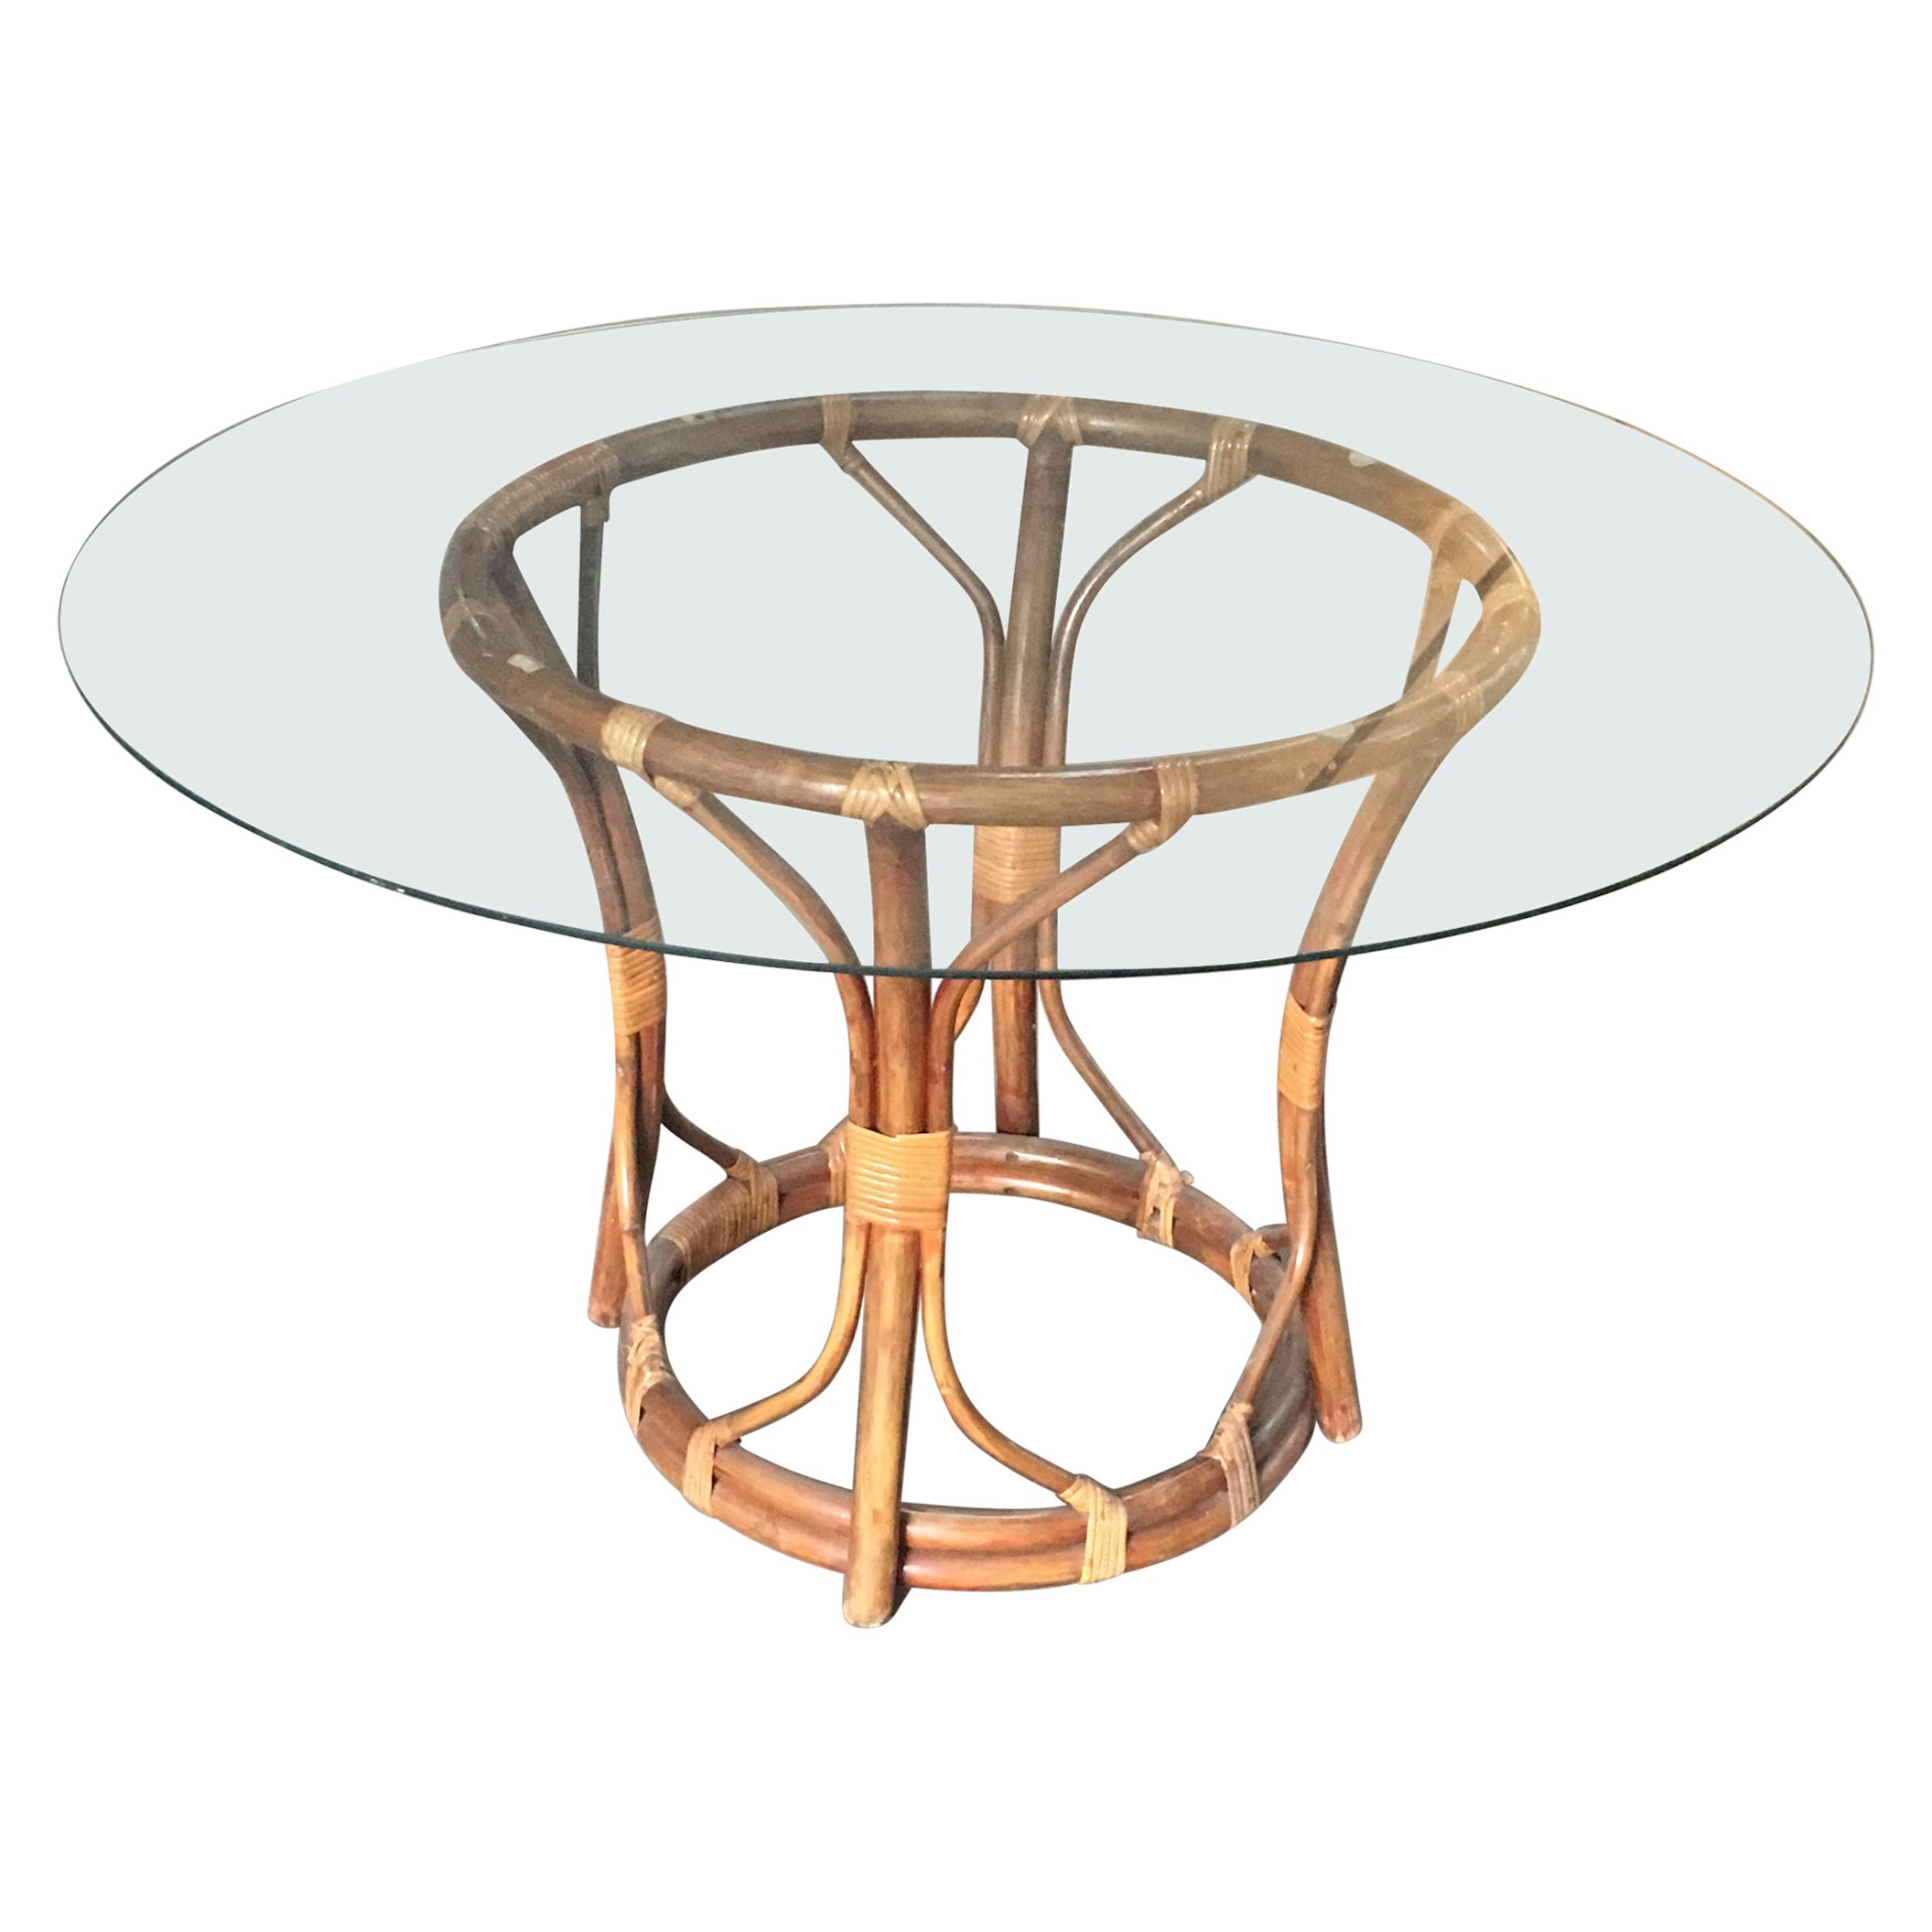 Mid-Century Modern Italian Bamboo and Cane Round Table with Glass Top, 1970s For Sale